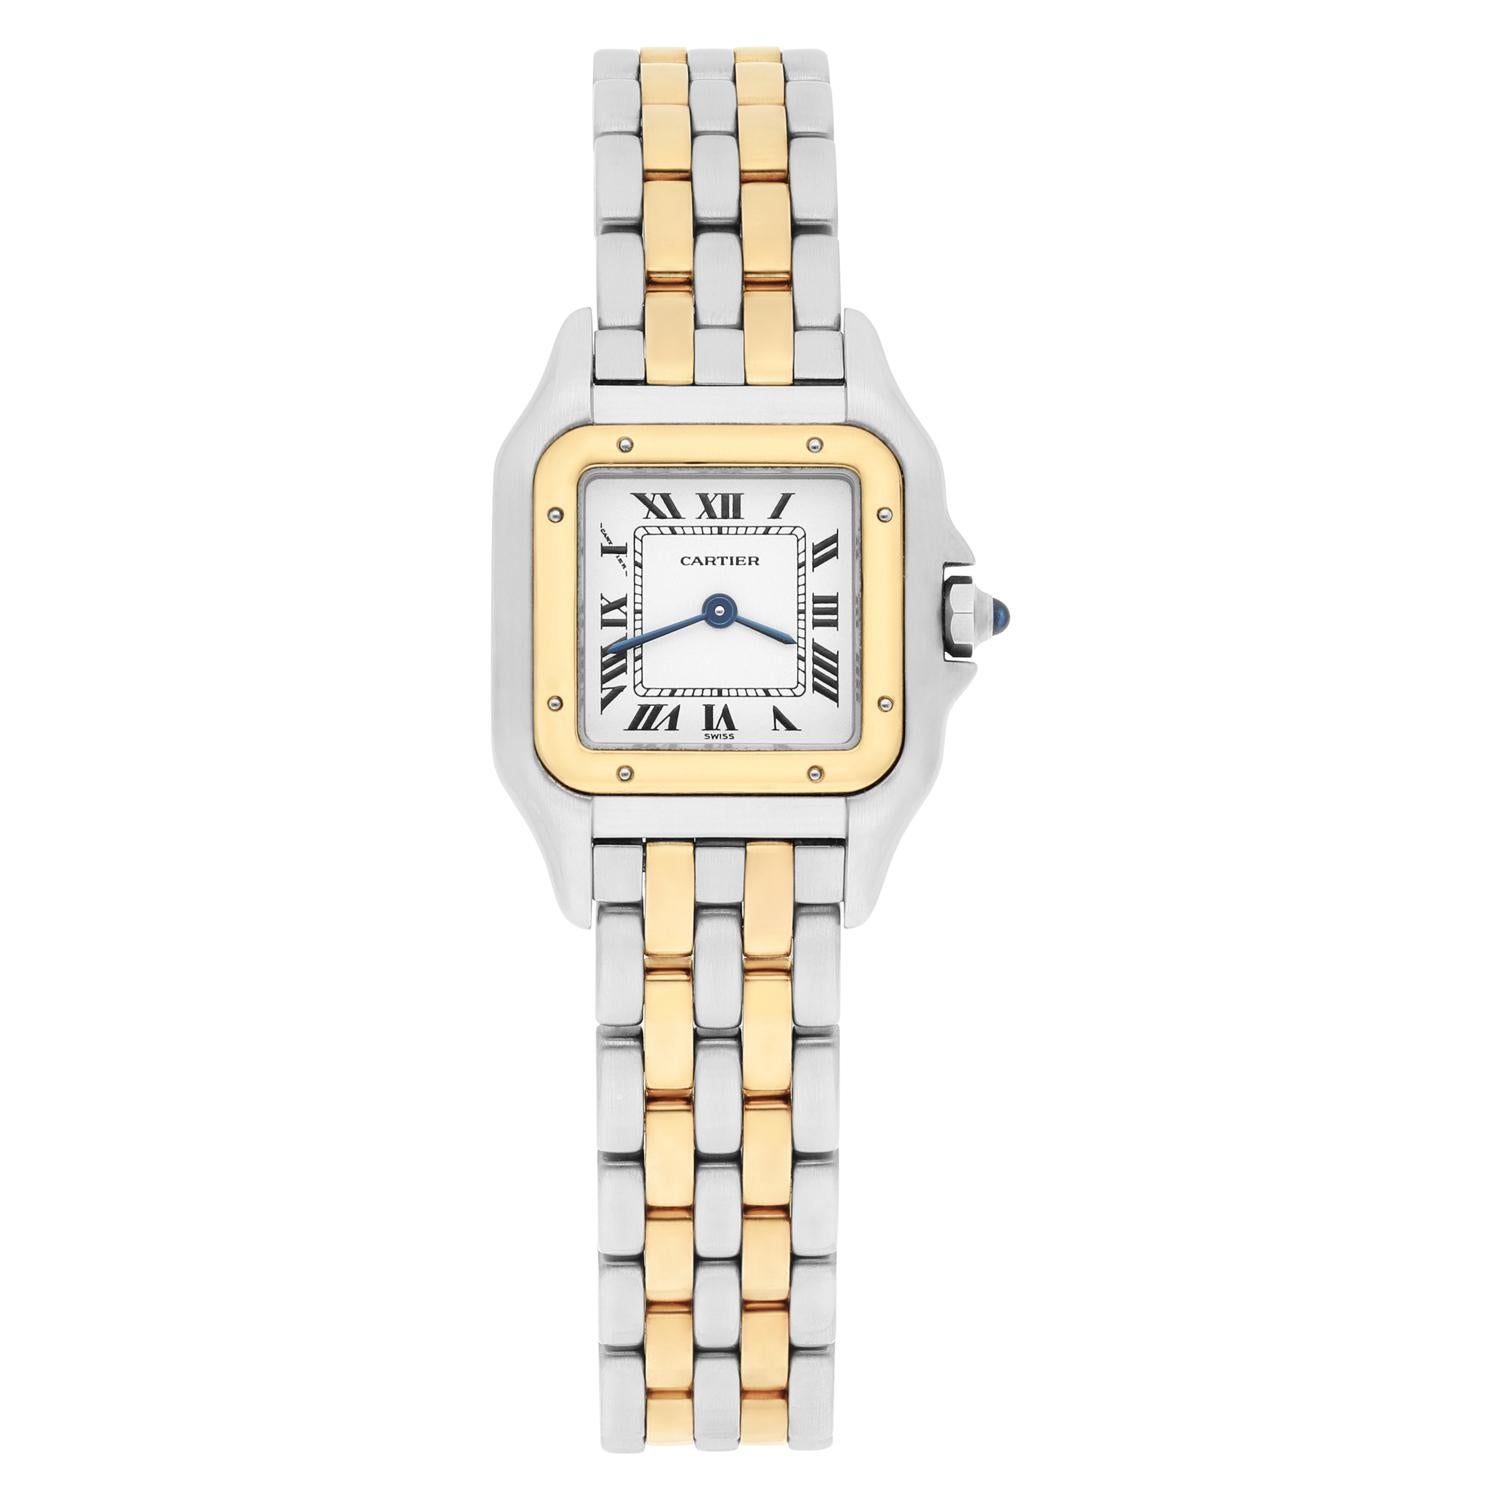 This Cartier Ladies Panthere wristwatch is a luxurious and elegant timepiece. Crafted in 18k yellow gold and stainless steel, it features an off-white dial with Roman numeral indices and a fixed yellow bezel. The watch has a quartz movement. It has